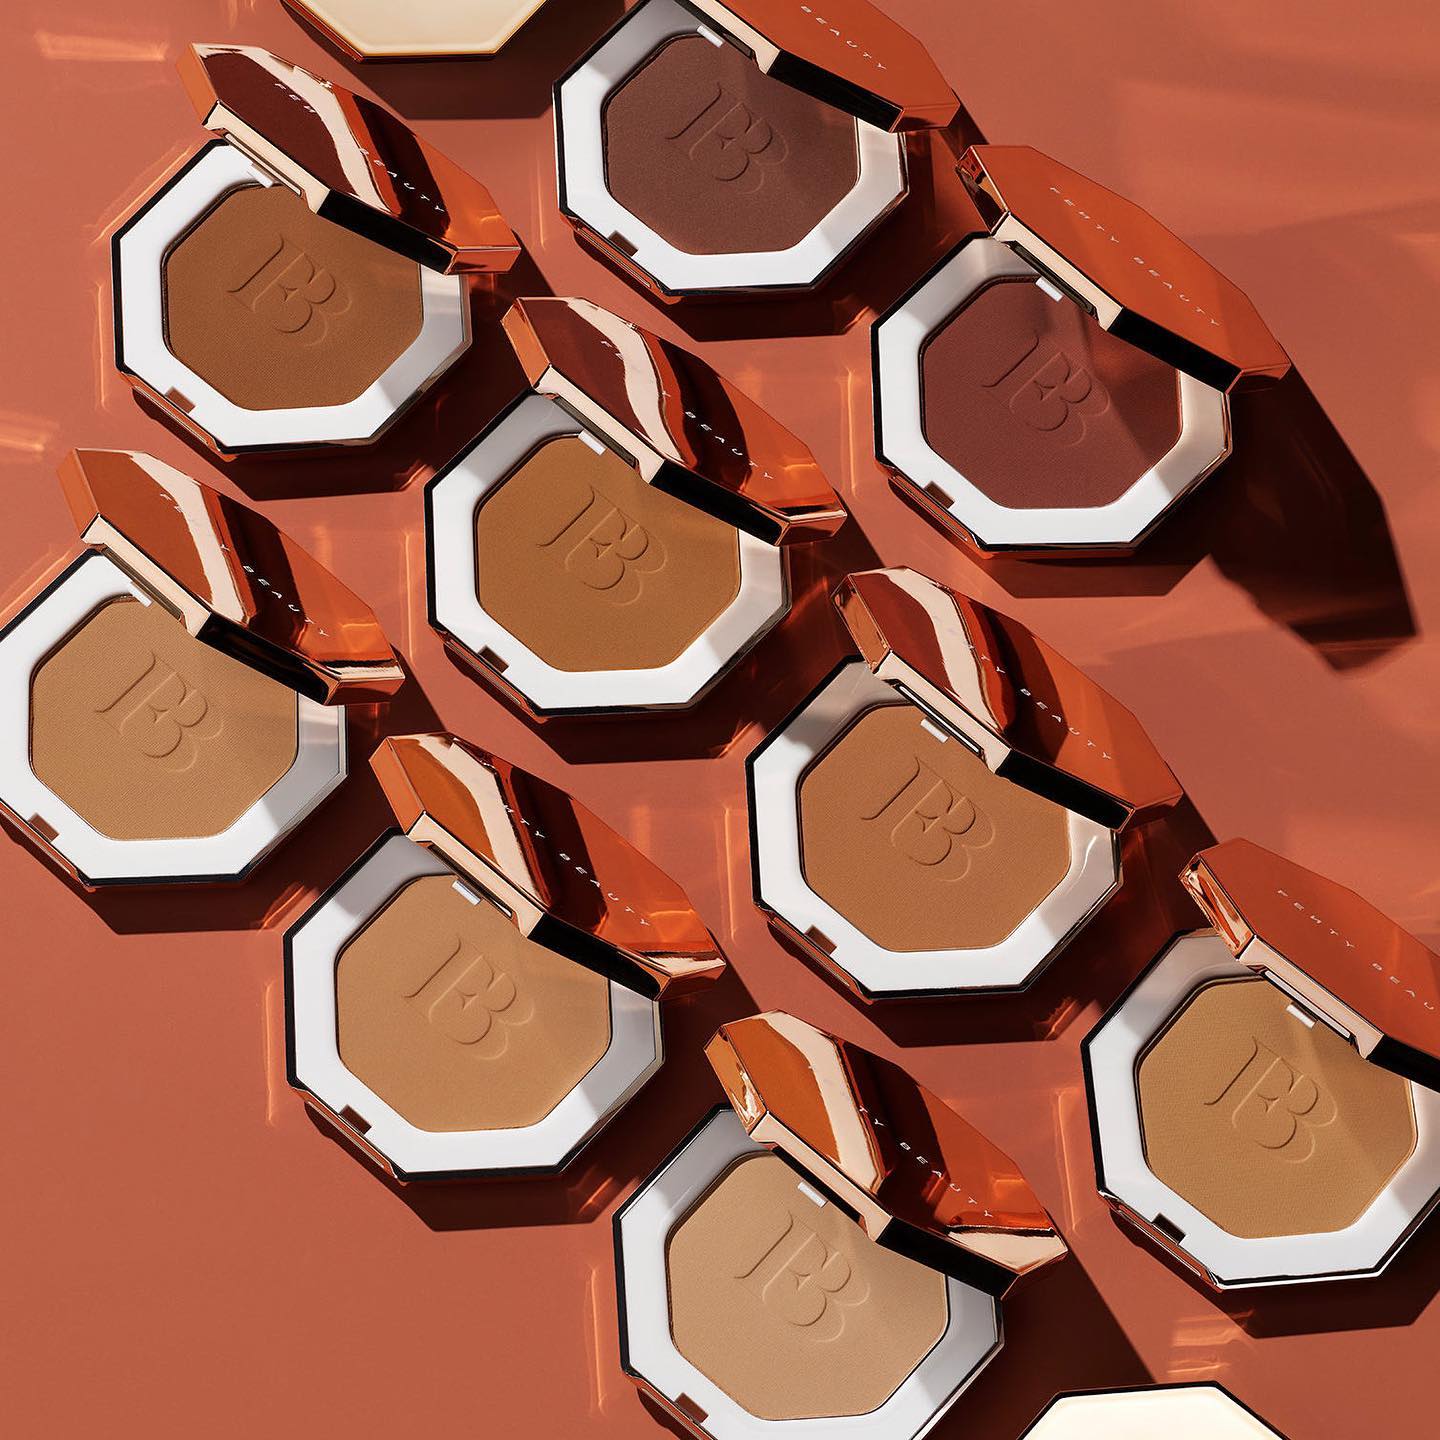 Various skin tone shades of Fenty Beauty Bronzer are displayed on a rust ornage background.